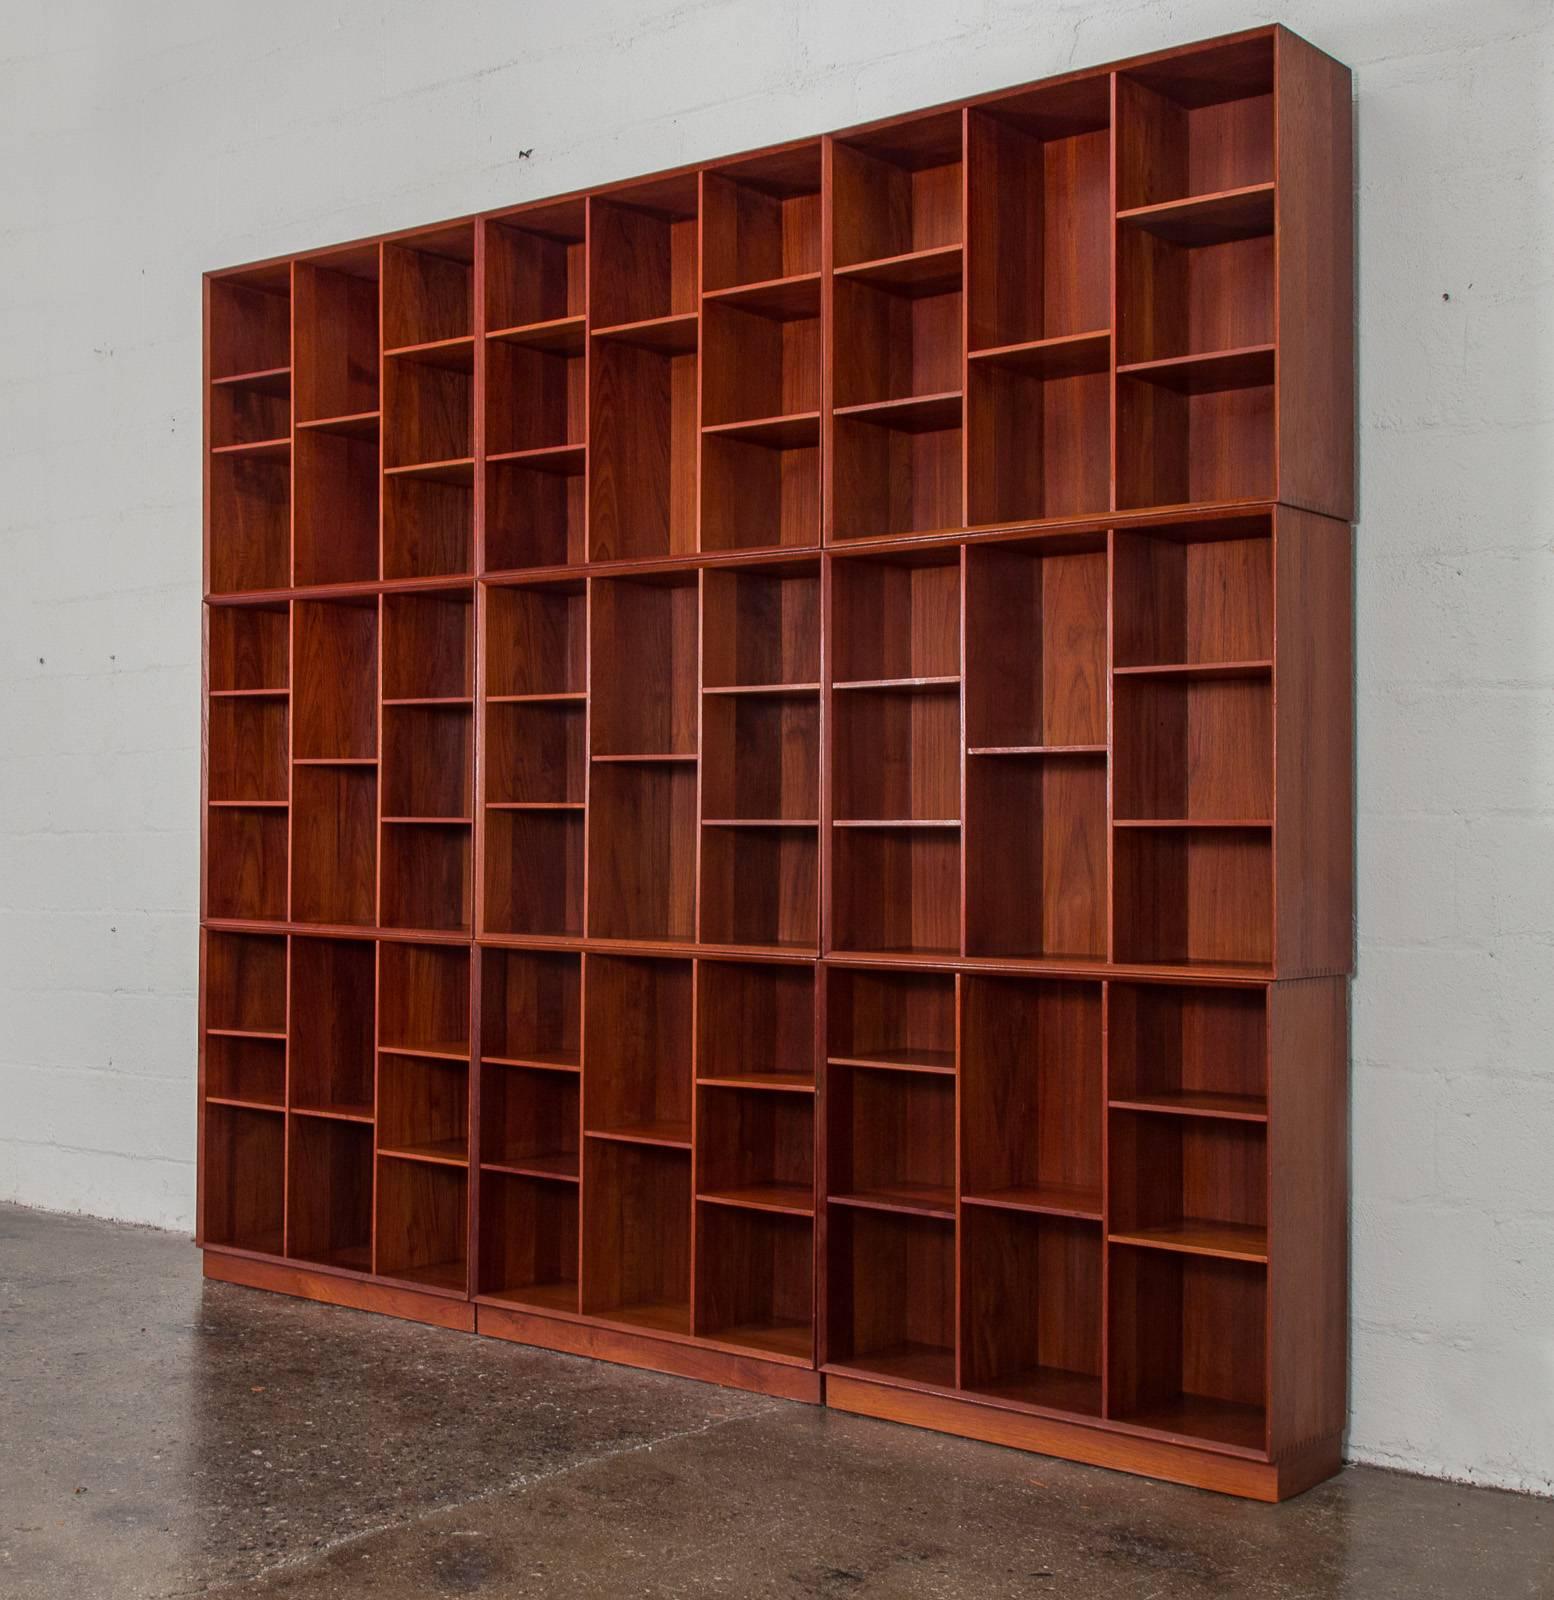 Incredible wall of stacking bookcases in gleaming teak designed by Peter Hvidt and Orla Mølgaard-Nielsen for Søborg Møbelfabrik. Bookcases are constructed with beautiful, solid box joinery and adjustable shelves for total customization. Vertical